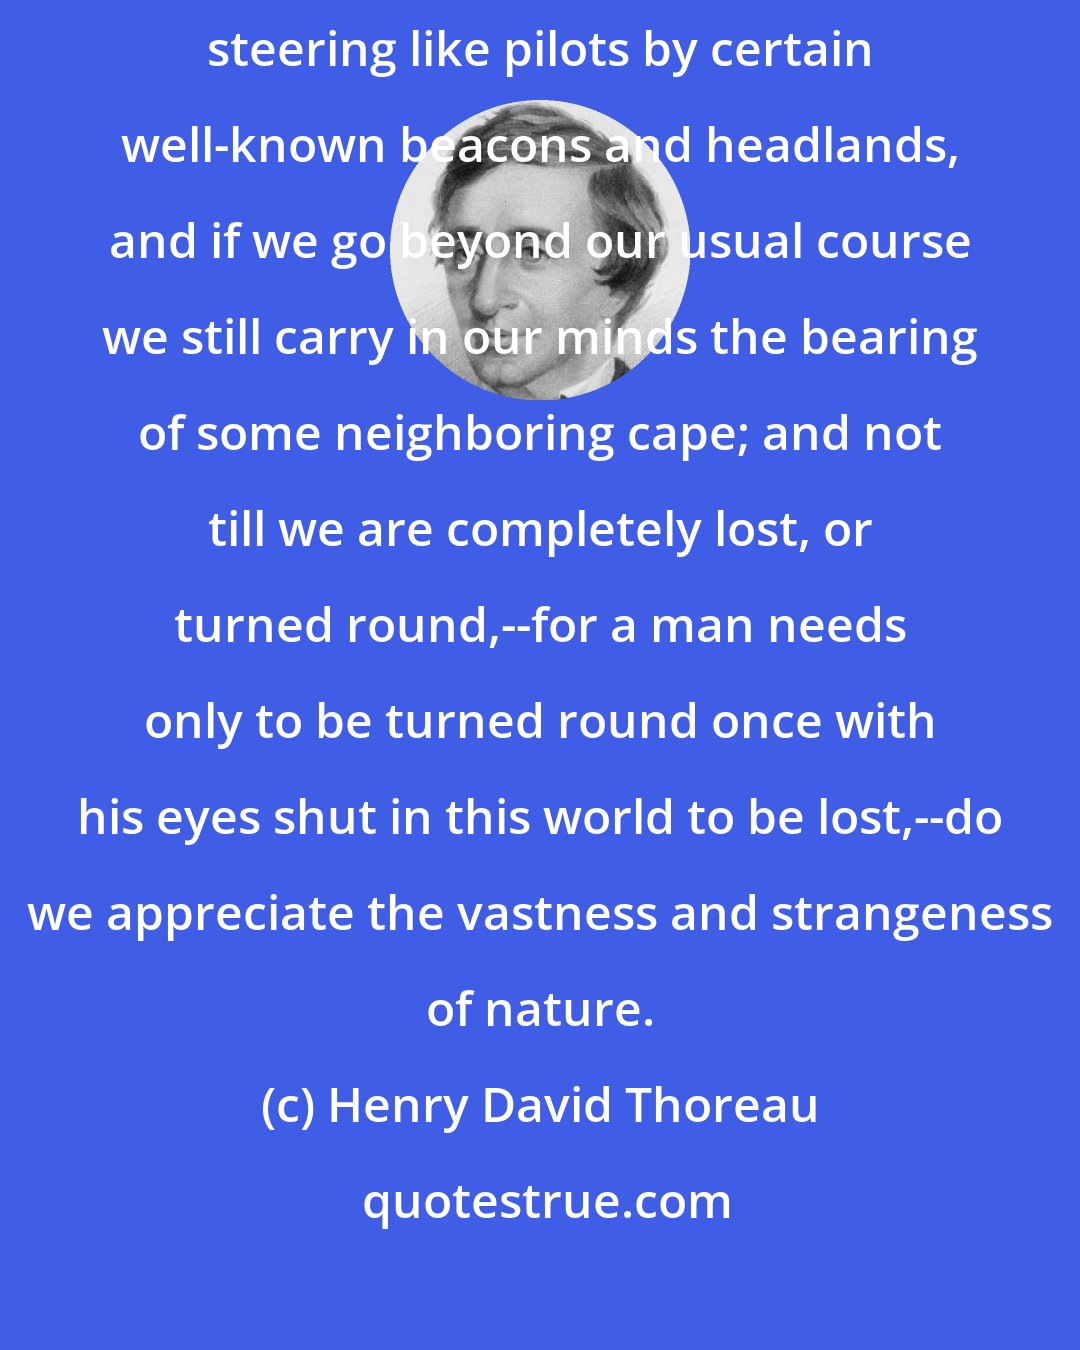 Henry David Thoreau: In our most trivial walks, we are constantly, though unconsciously, steering like pilots by certain well-known beacons and headlands, and if we go beyond our usual course we still carry in our minds the bearing of some neighboring cape; and not till we are completely lost, or turned round,--for a man needs only to be turned round once with his eyes shut in this world to be lost,--do we appreciate the vastness and strangeness of nature.